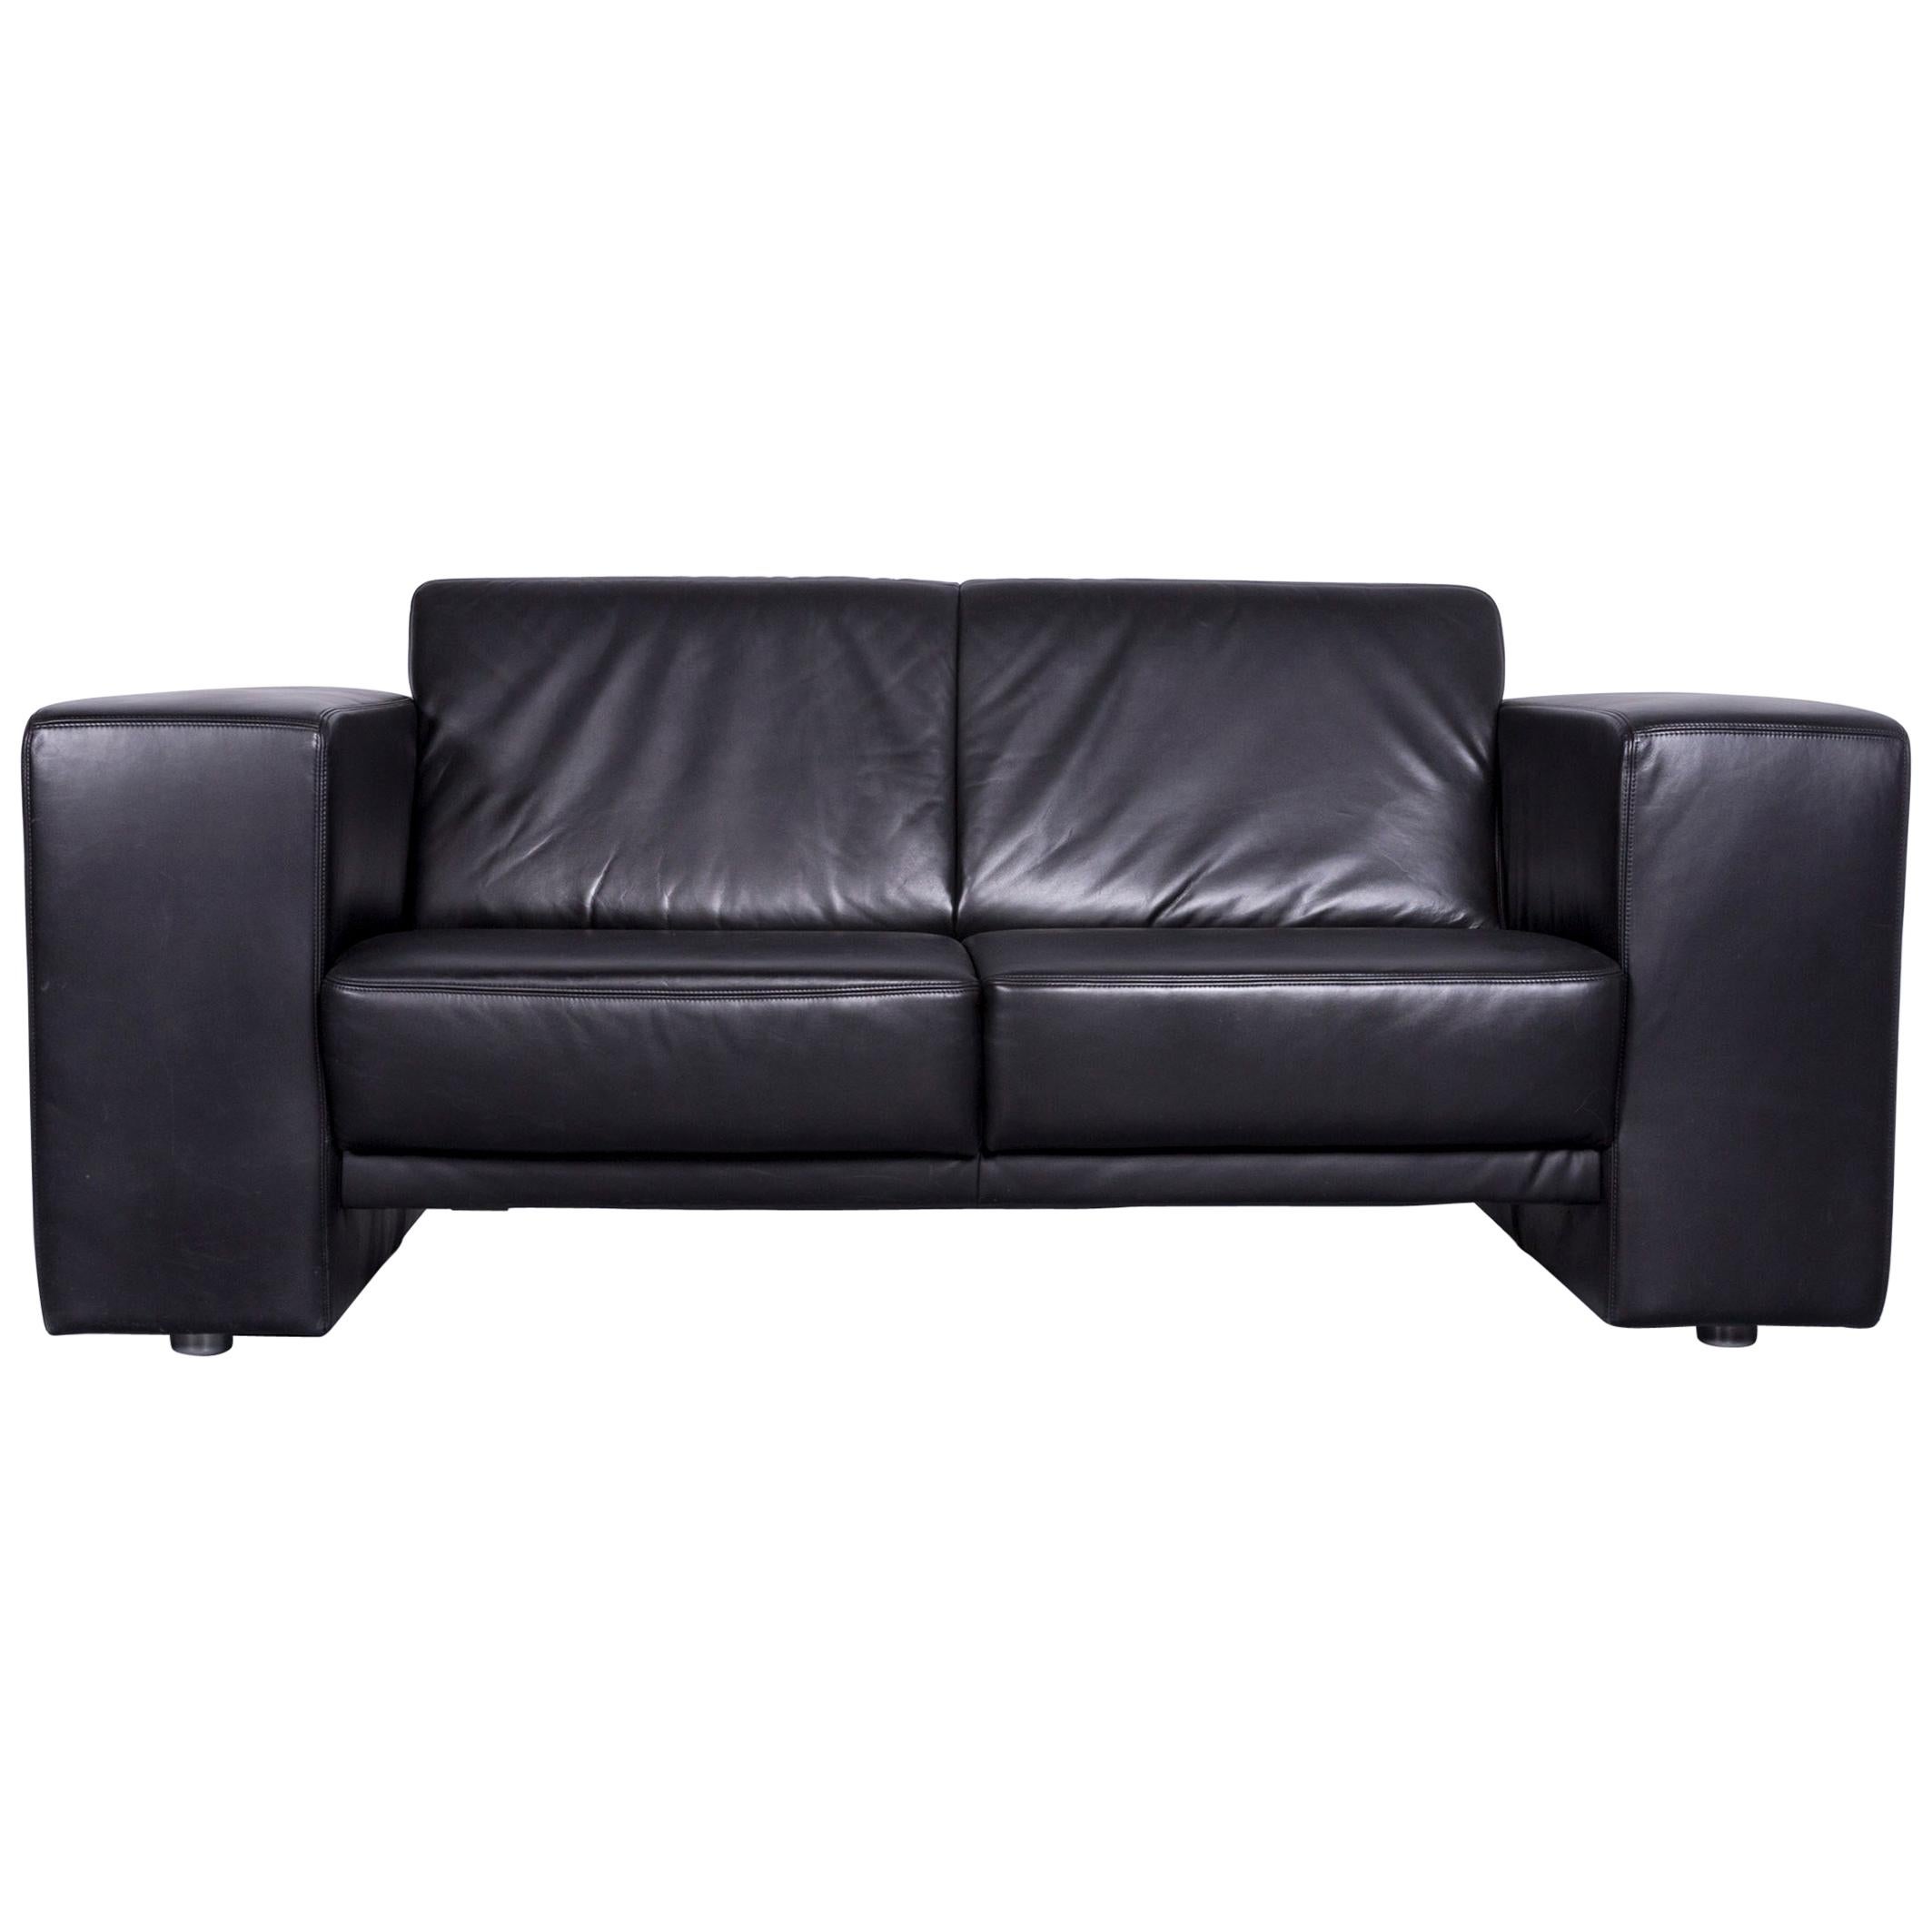 Koinor Designer Leather Sofa Black Two-Seat Couch For Sale